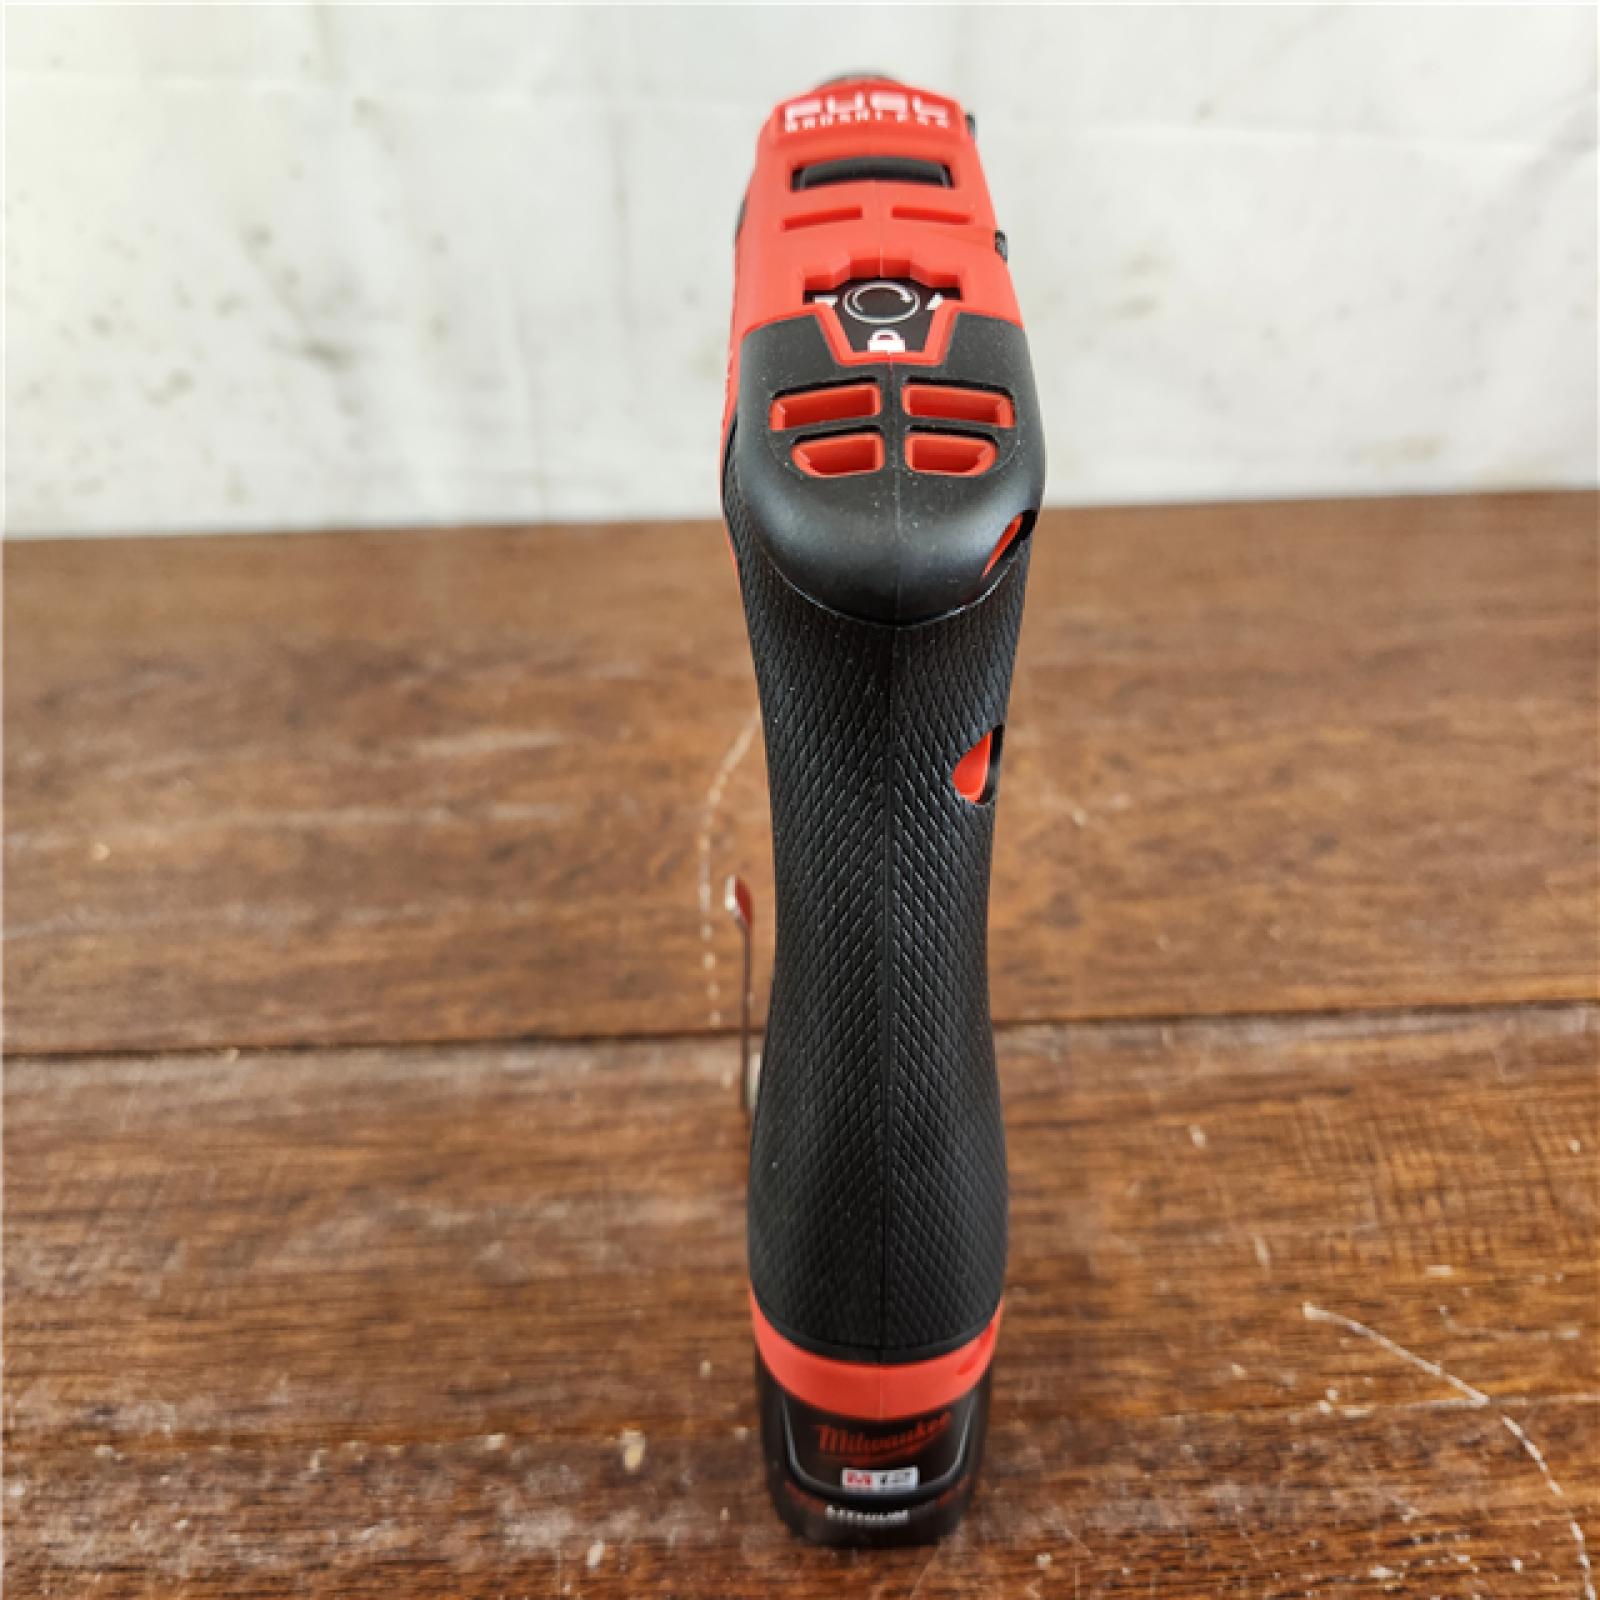 AS-IS Milwaukee M12 FUEL 12V Brushless Cordless (4-in-1) Installation Drill/Driver Kit